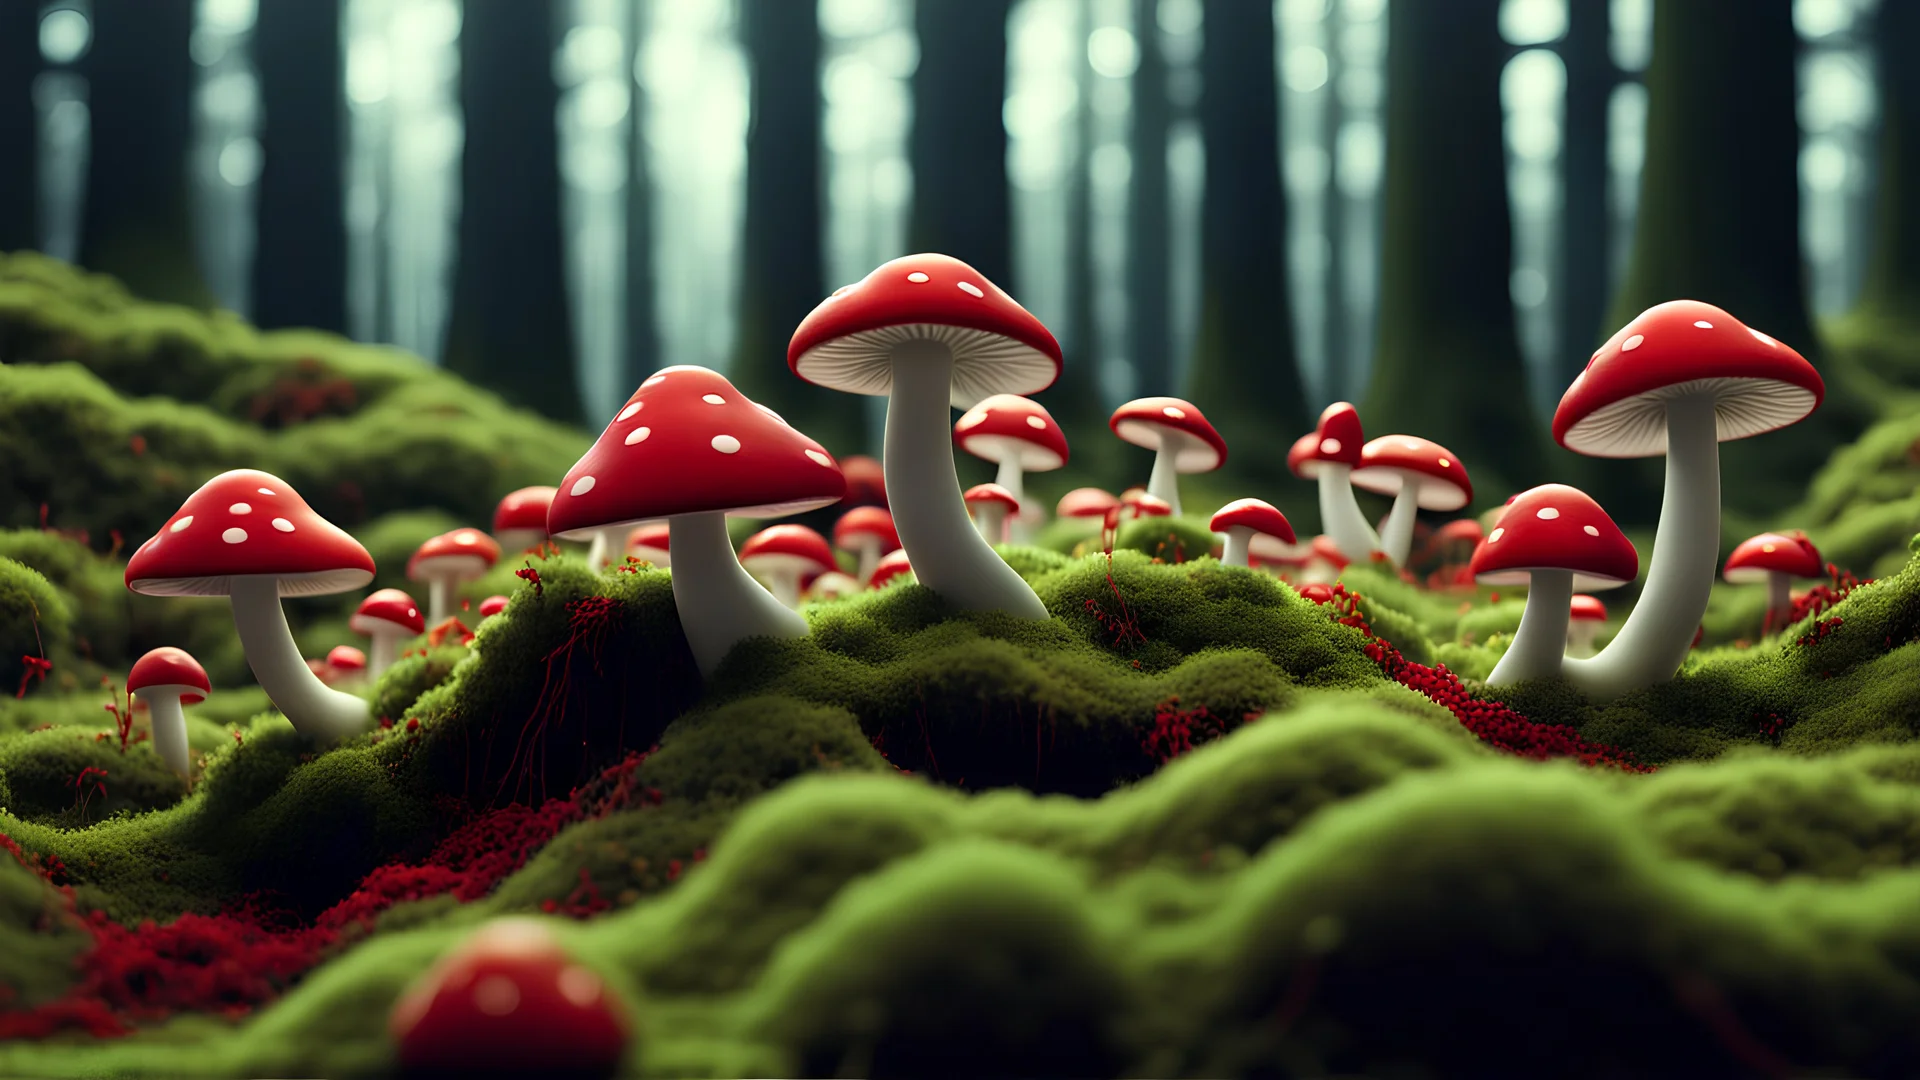 Musical Wave , Natural Moss and Red mushrooms Wave, Natural Moss network lines , Realistic 3D Render, Macro, mesh, wave network, geometric, Nikon Macro Shot, Kinetic, Fractal, Light Led Points, Generative, Neural, Computer Network, Connections, Forest Moss and mushrooms Strings,